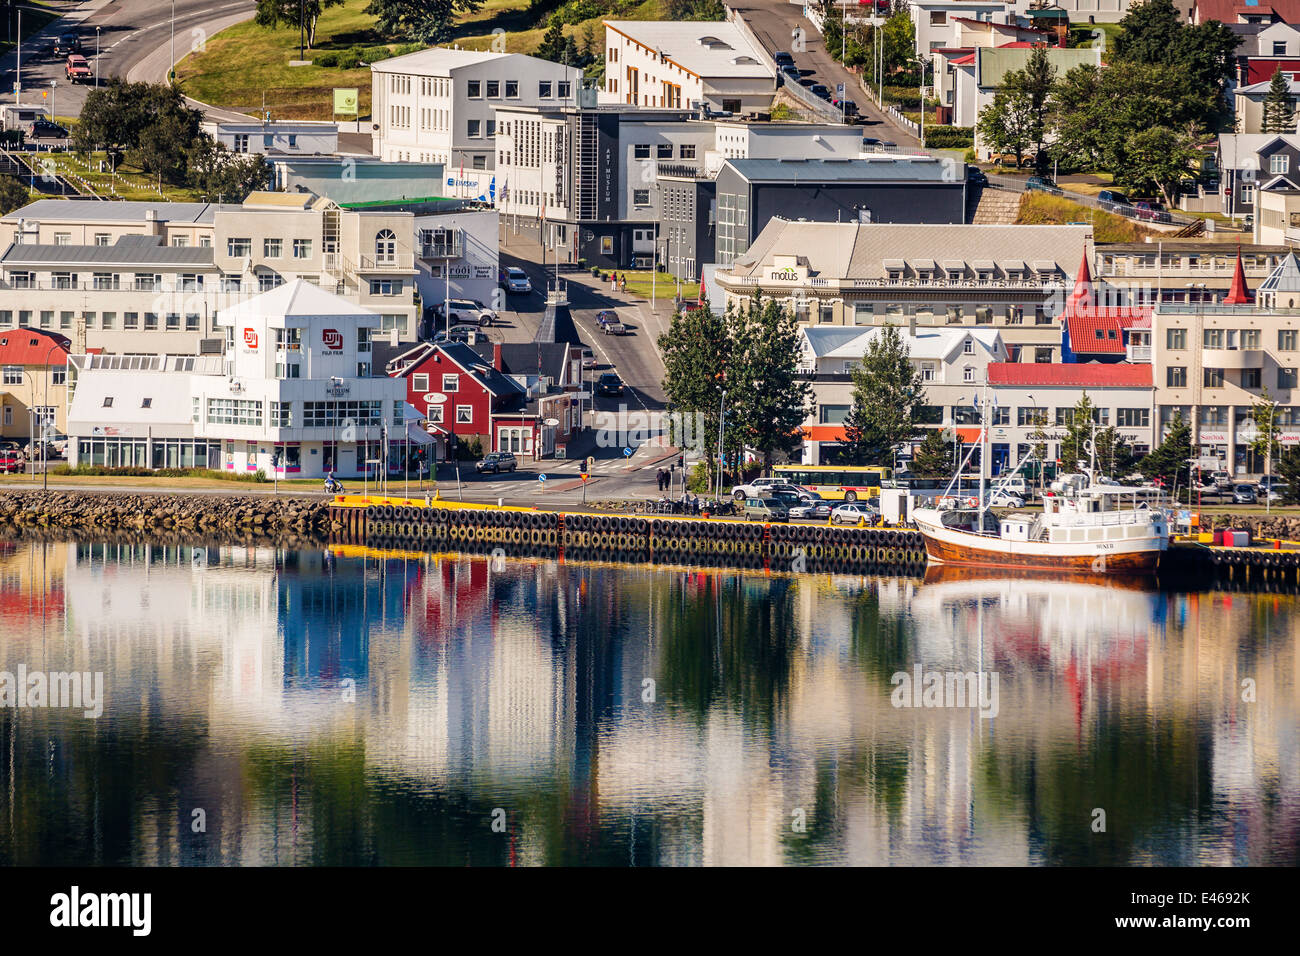 Boat docked with Homes and Apartments, Akureyri, Iceland Stock Photo